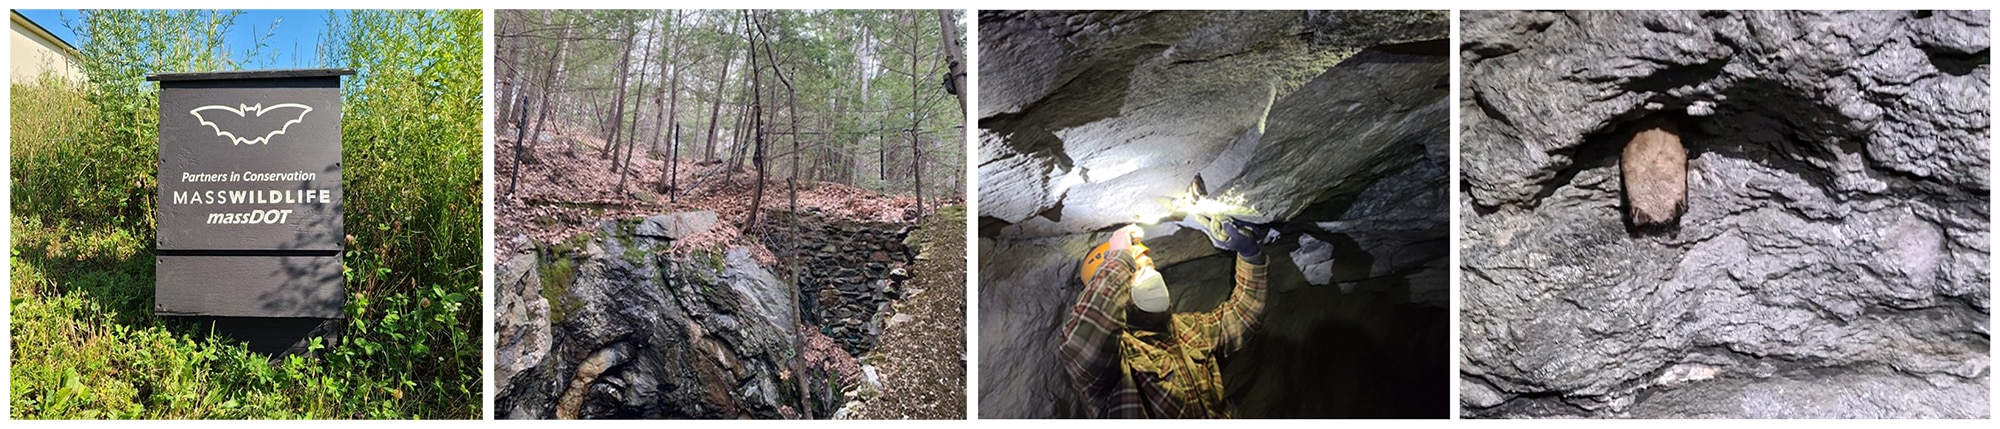 Collage image shows from left to right: 1. A sign that says "Partners in conservation. MassWildlife. MassDOT", 2. an entrance to a bat cave in the woods, 3. a MassDOT employee inspecting a cave bat habitat, and 4. a close up of a bat sleeping in a cave